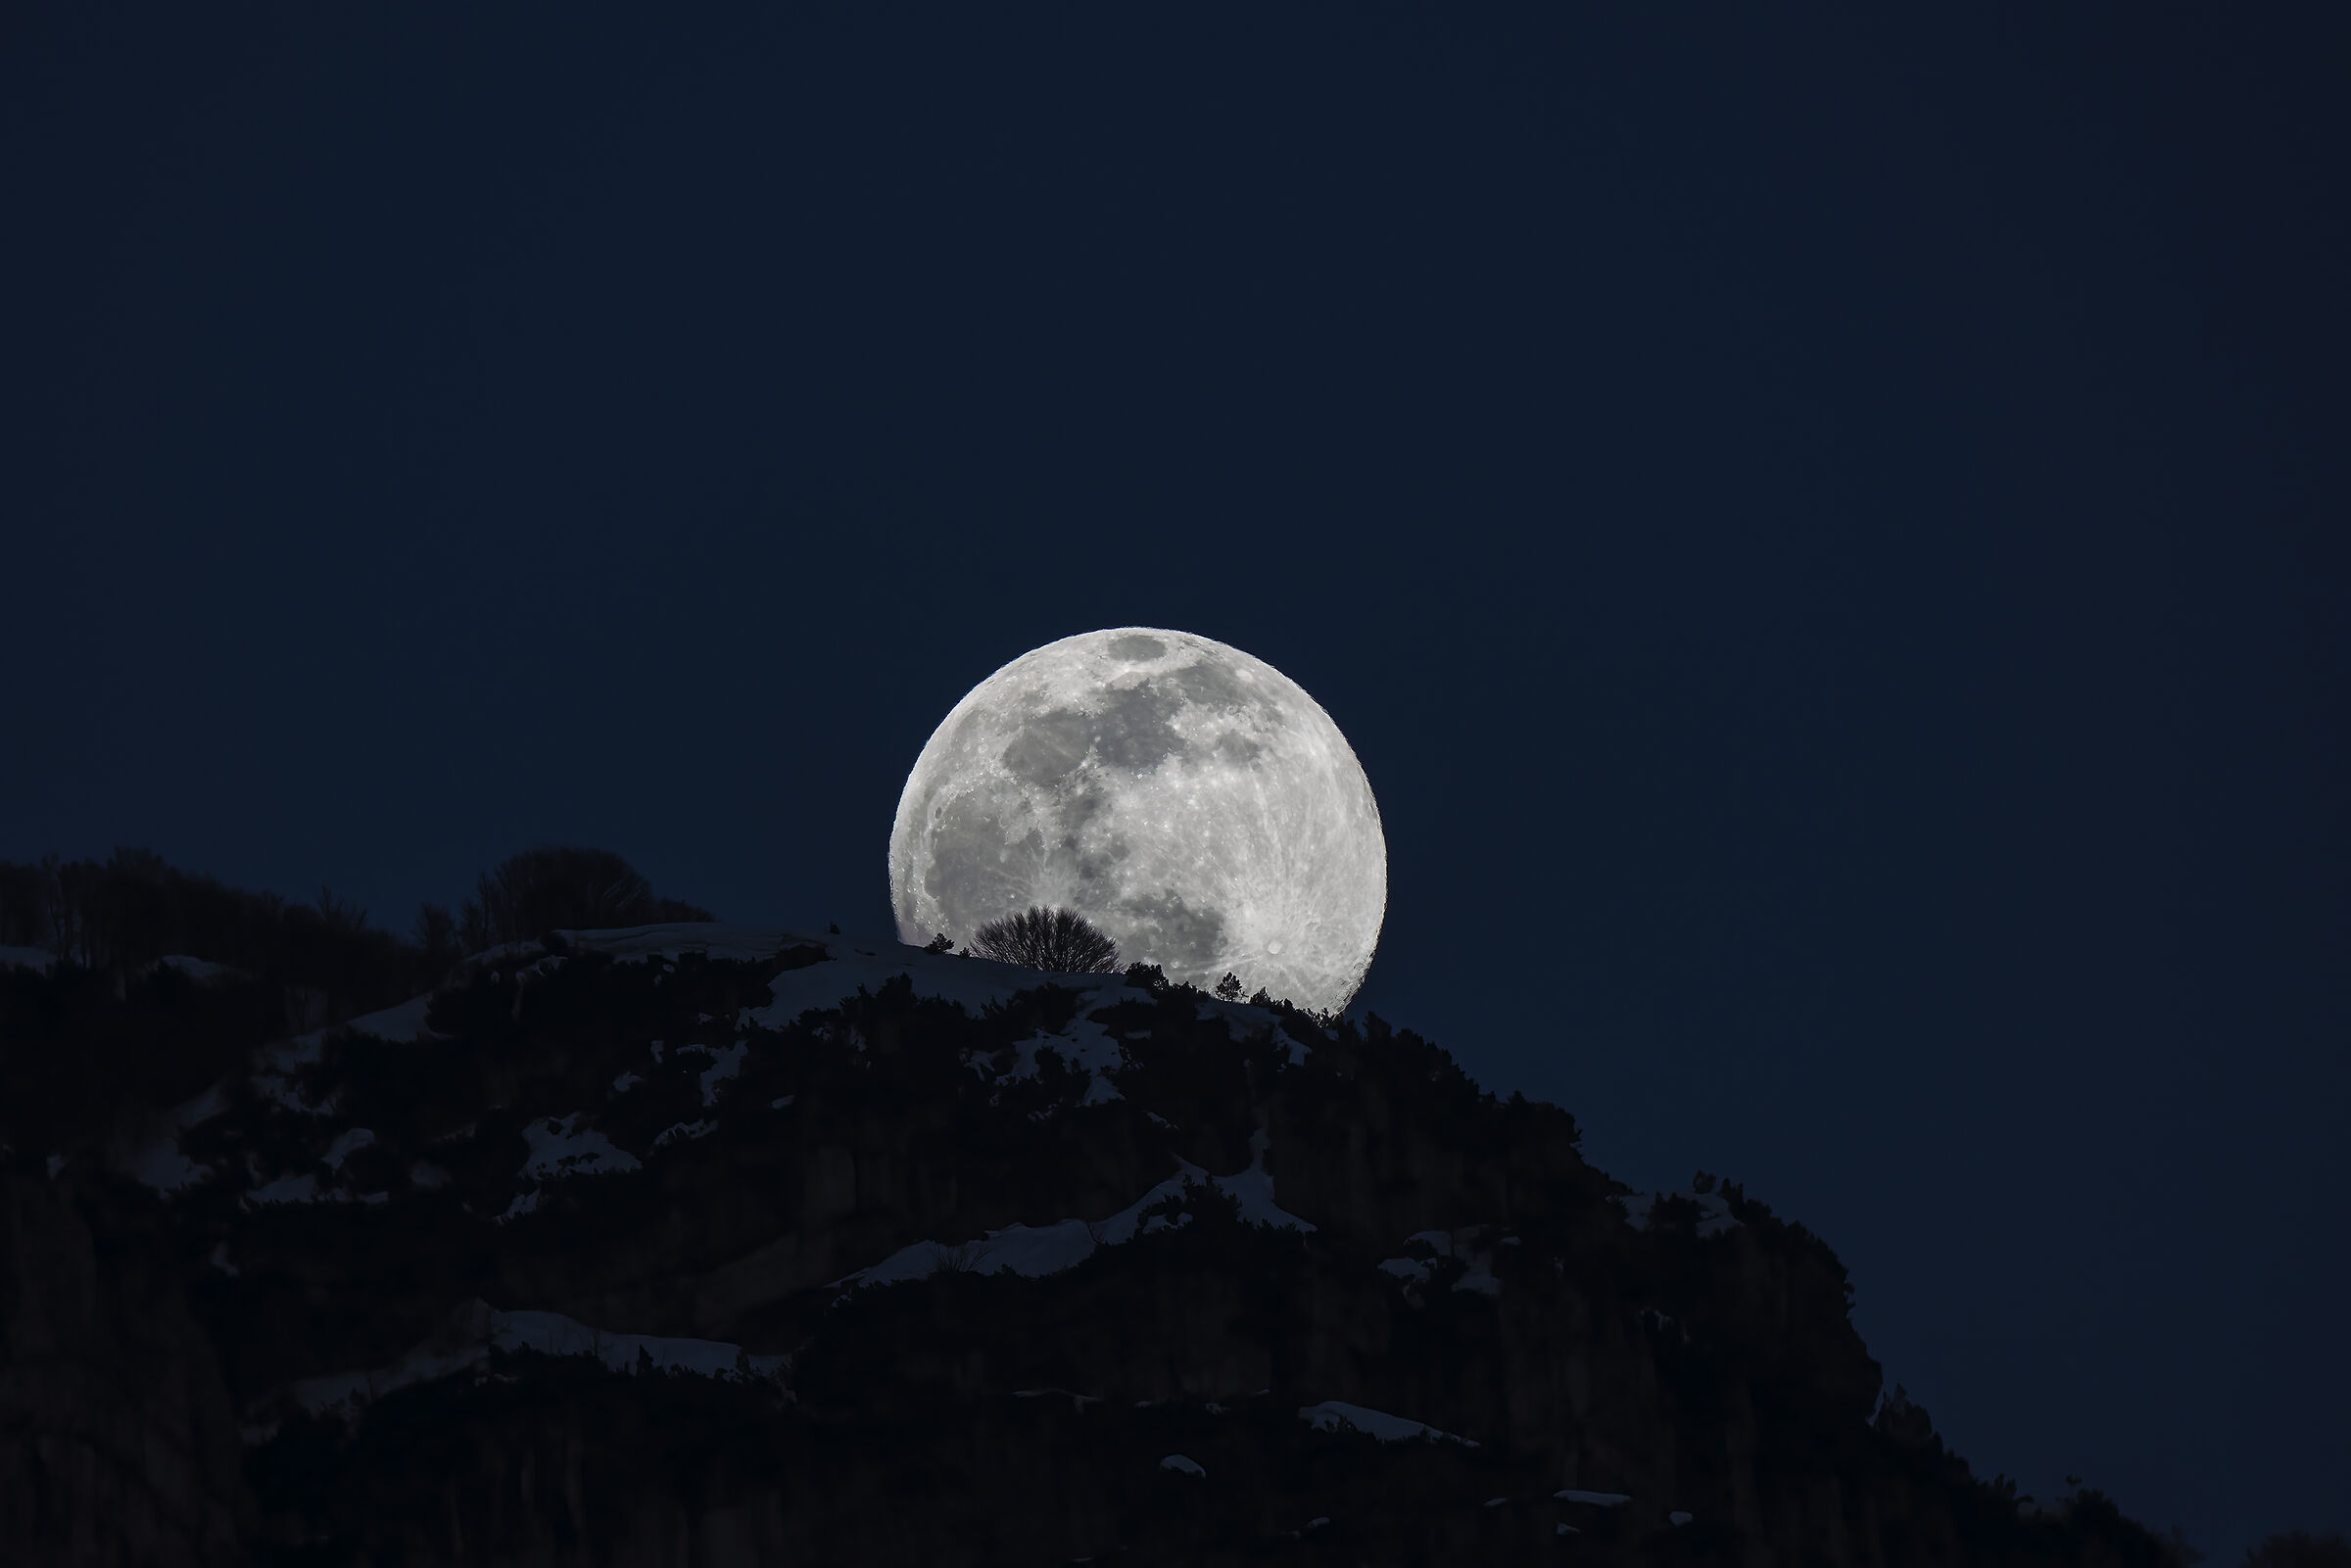 The moon rises from the mountain...